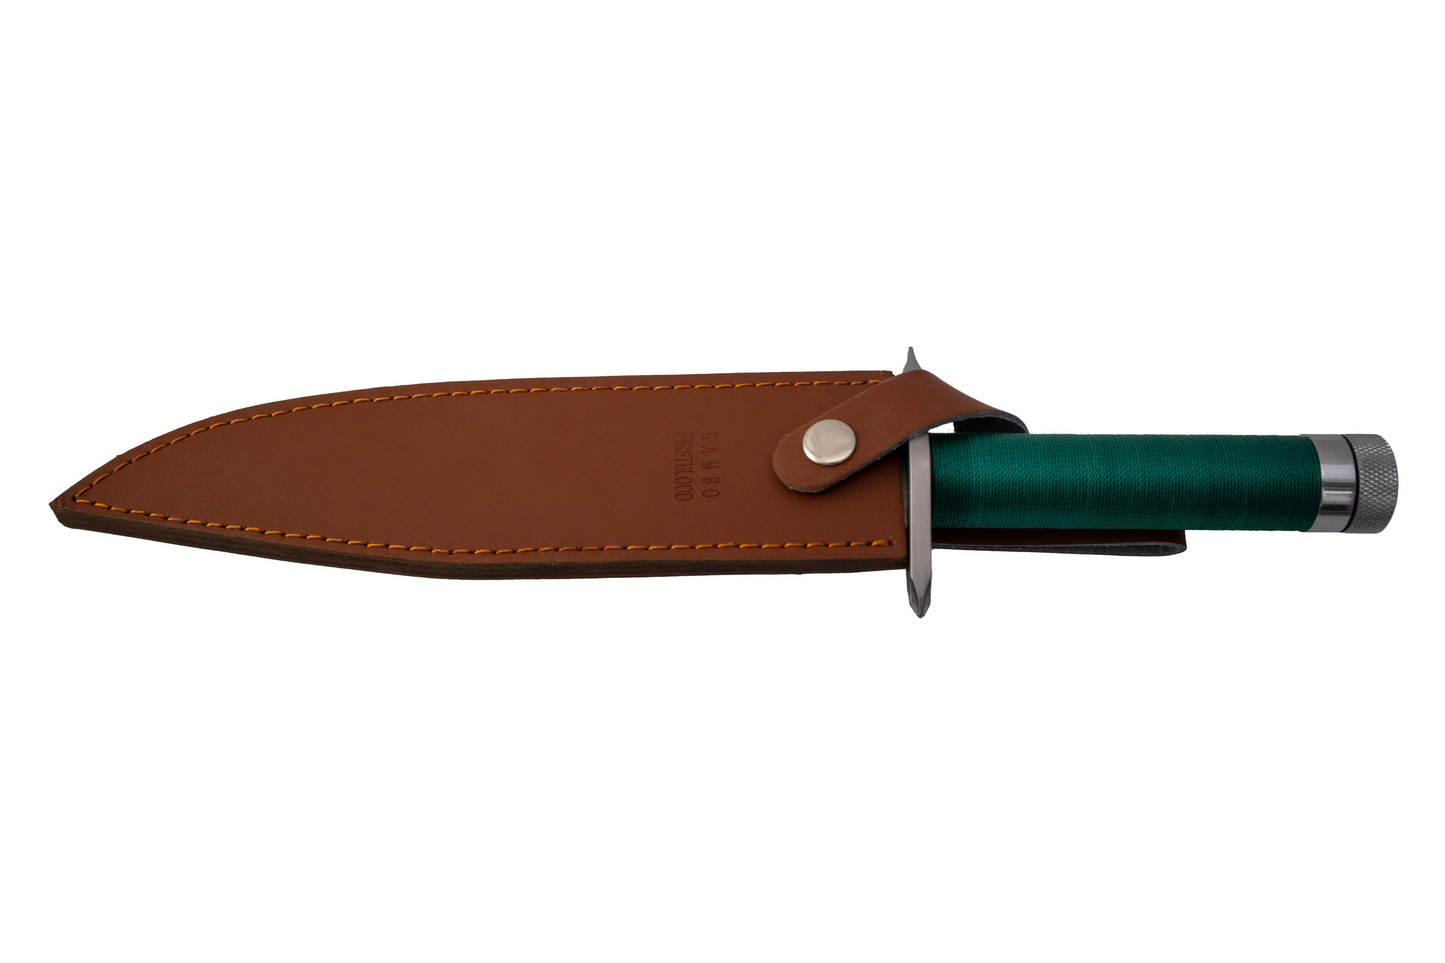 RAMBO FIRST BLOOD SURVIVAL HUNTING KNIFE DELUXE EDITION WITH LEATHER SHEATH